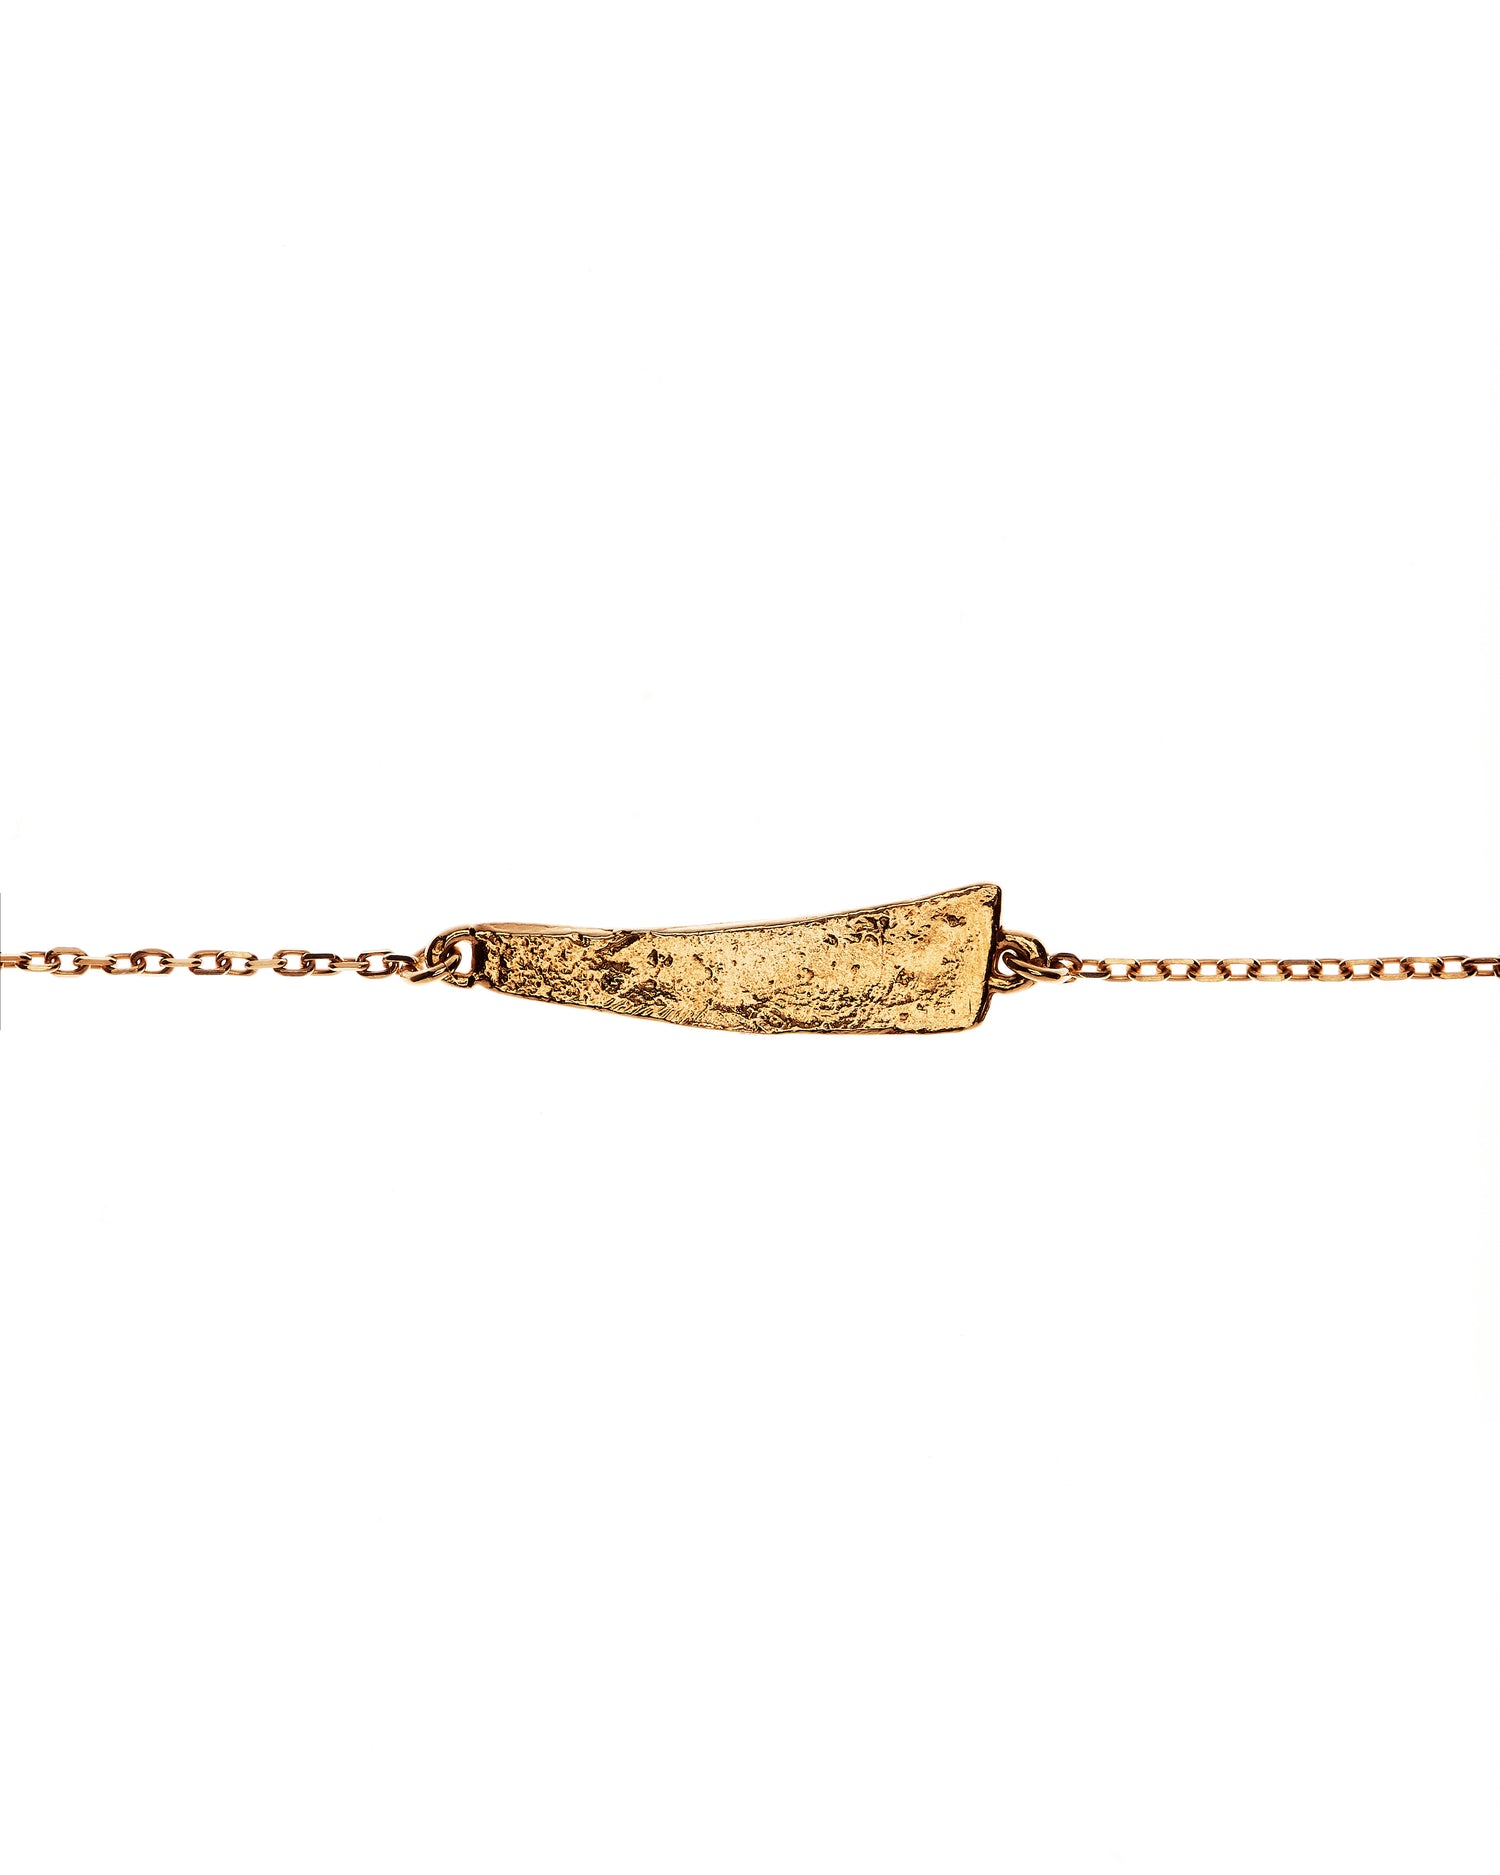 Textured gold vermeil casting on delicate chain